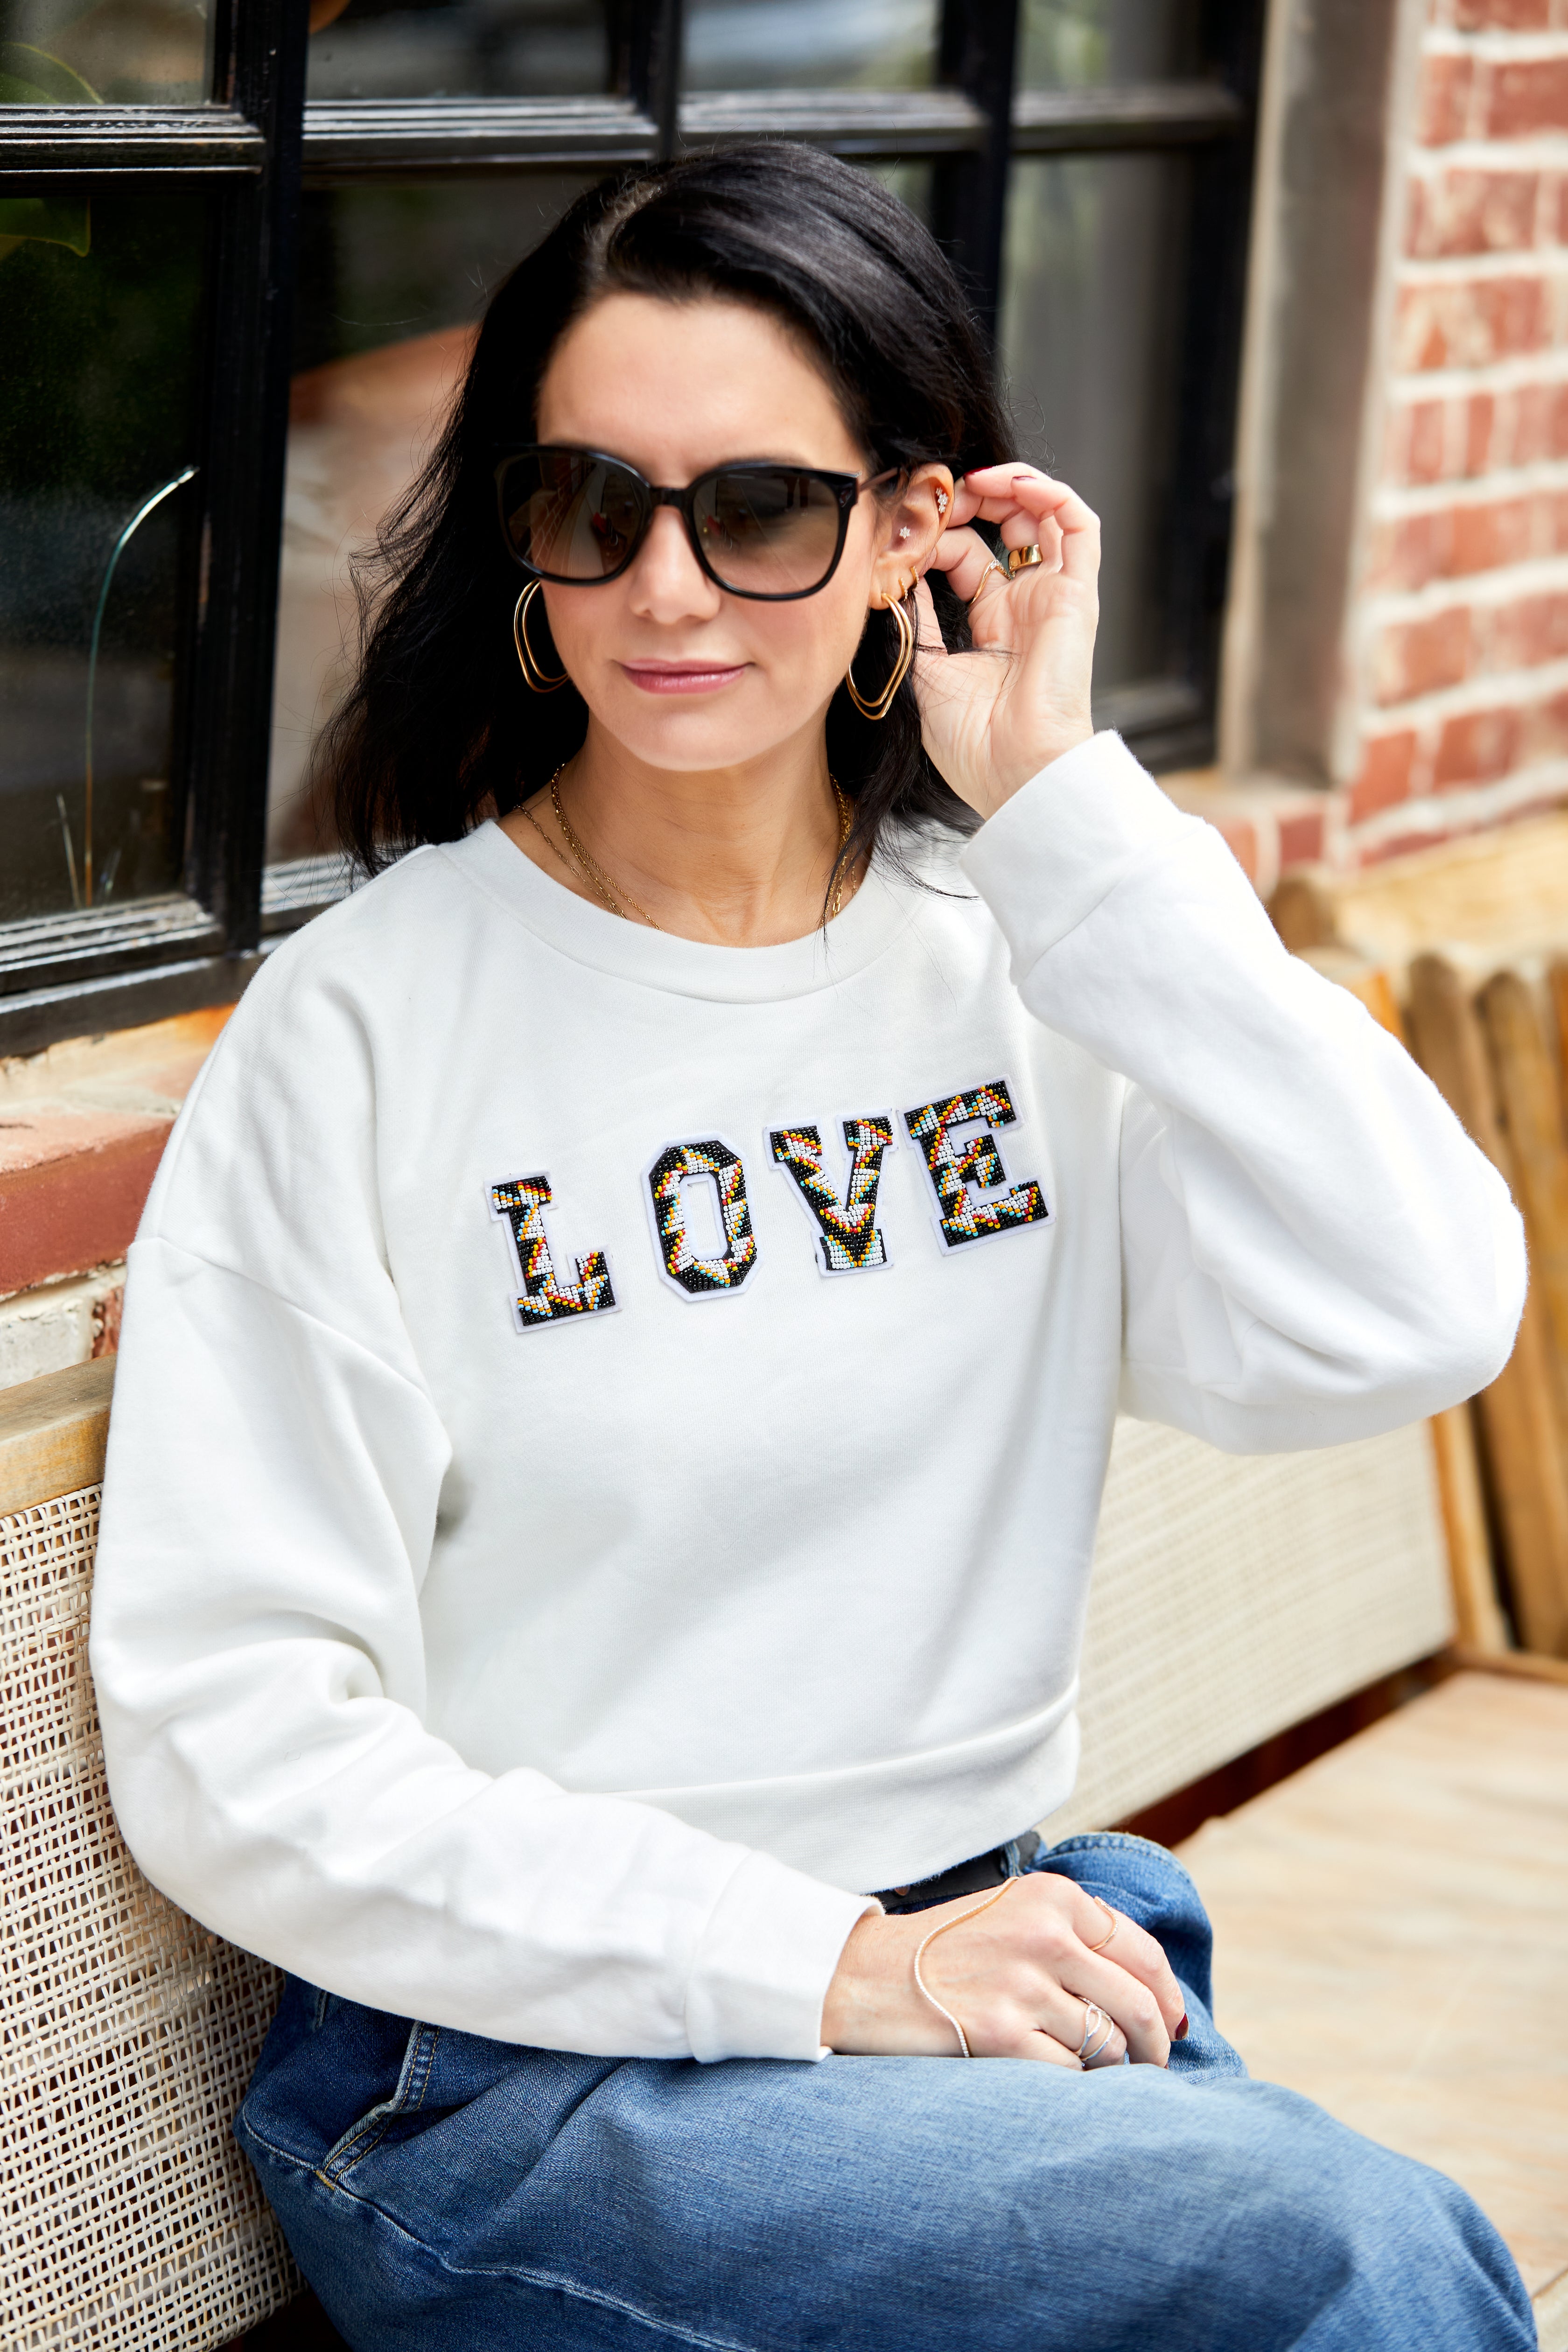 One-of-a-kind Reformation x Love is Project Sweatshirt